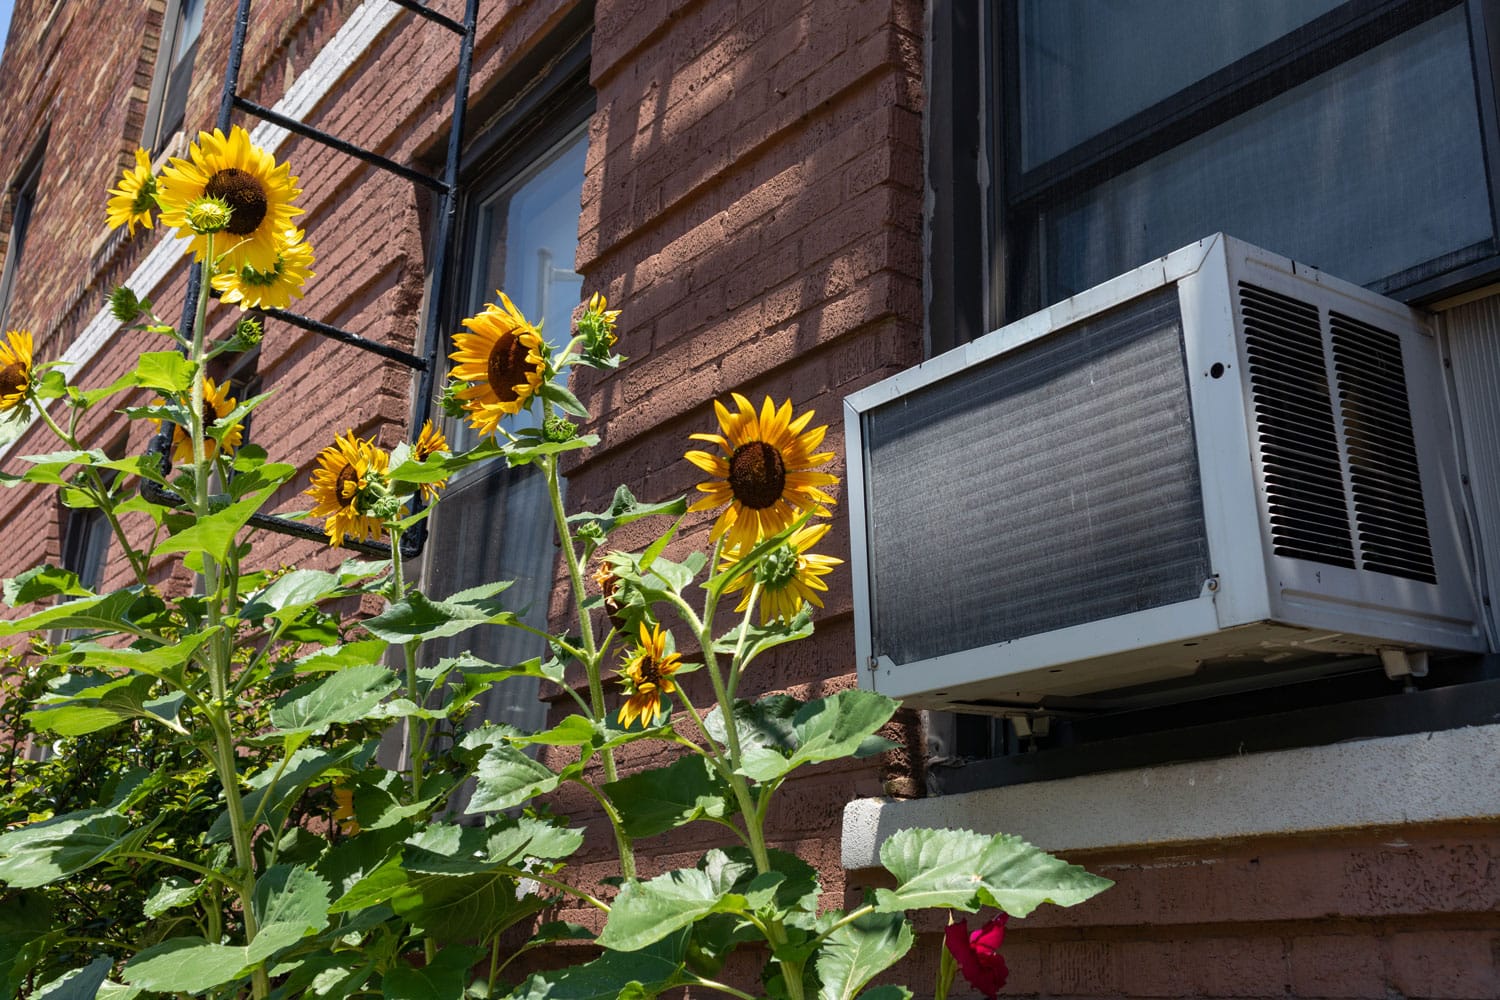 An air conditioning unit photographed outside an apartment building